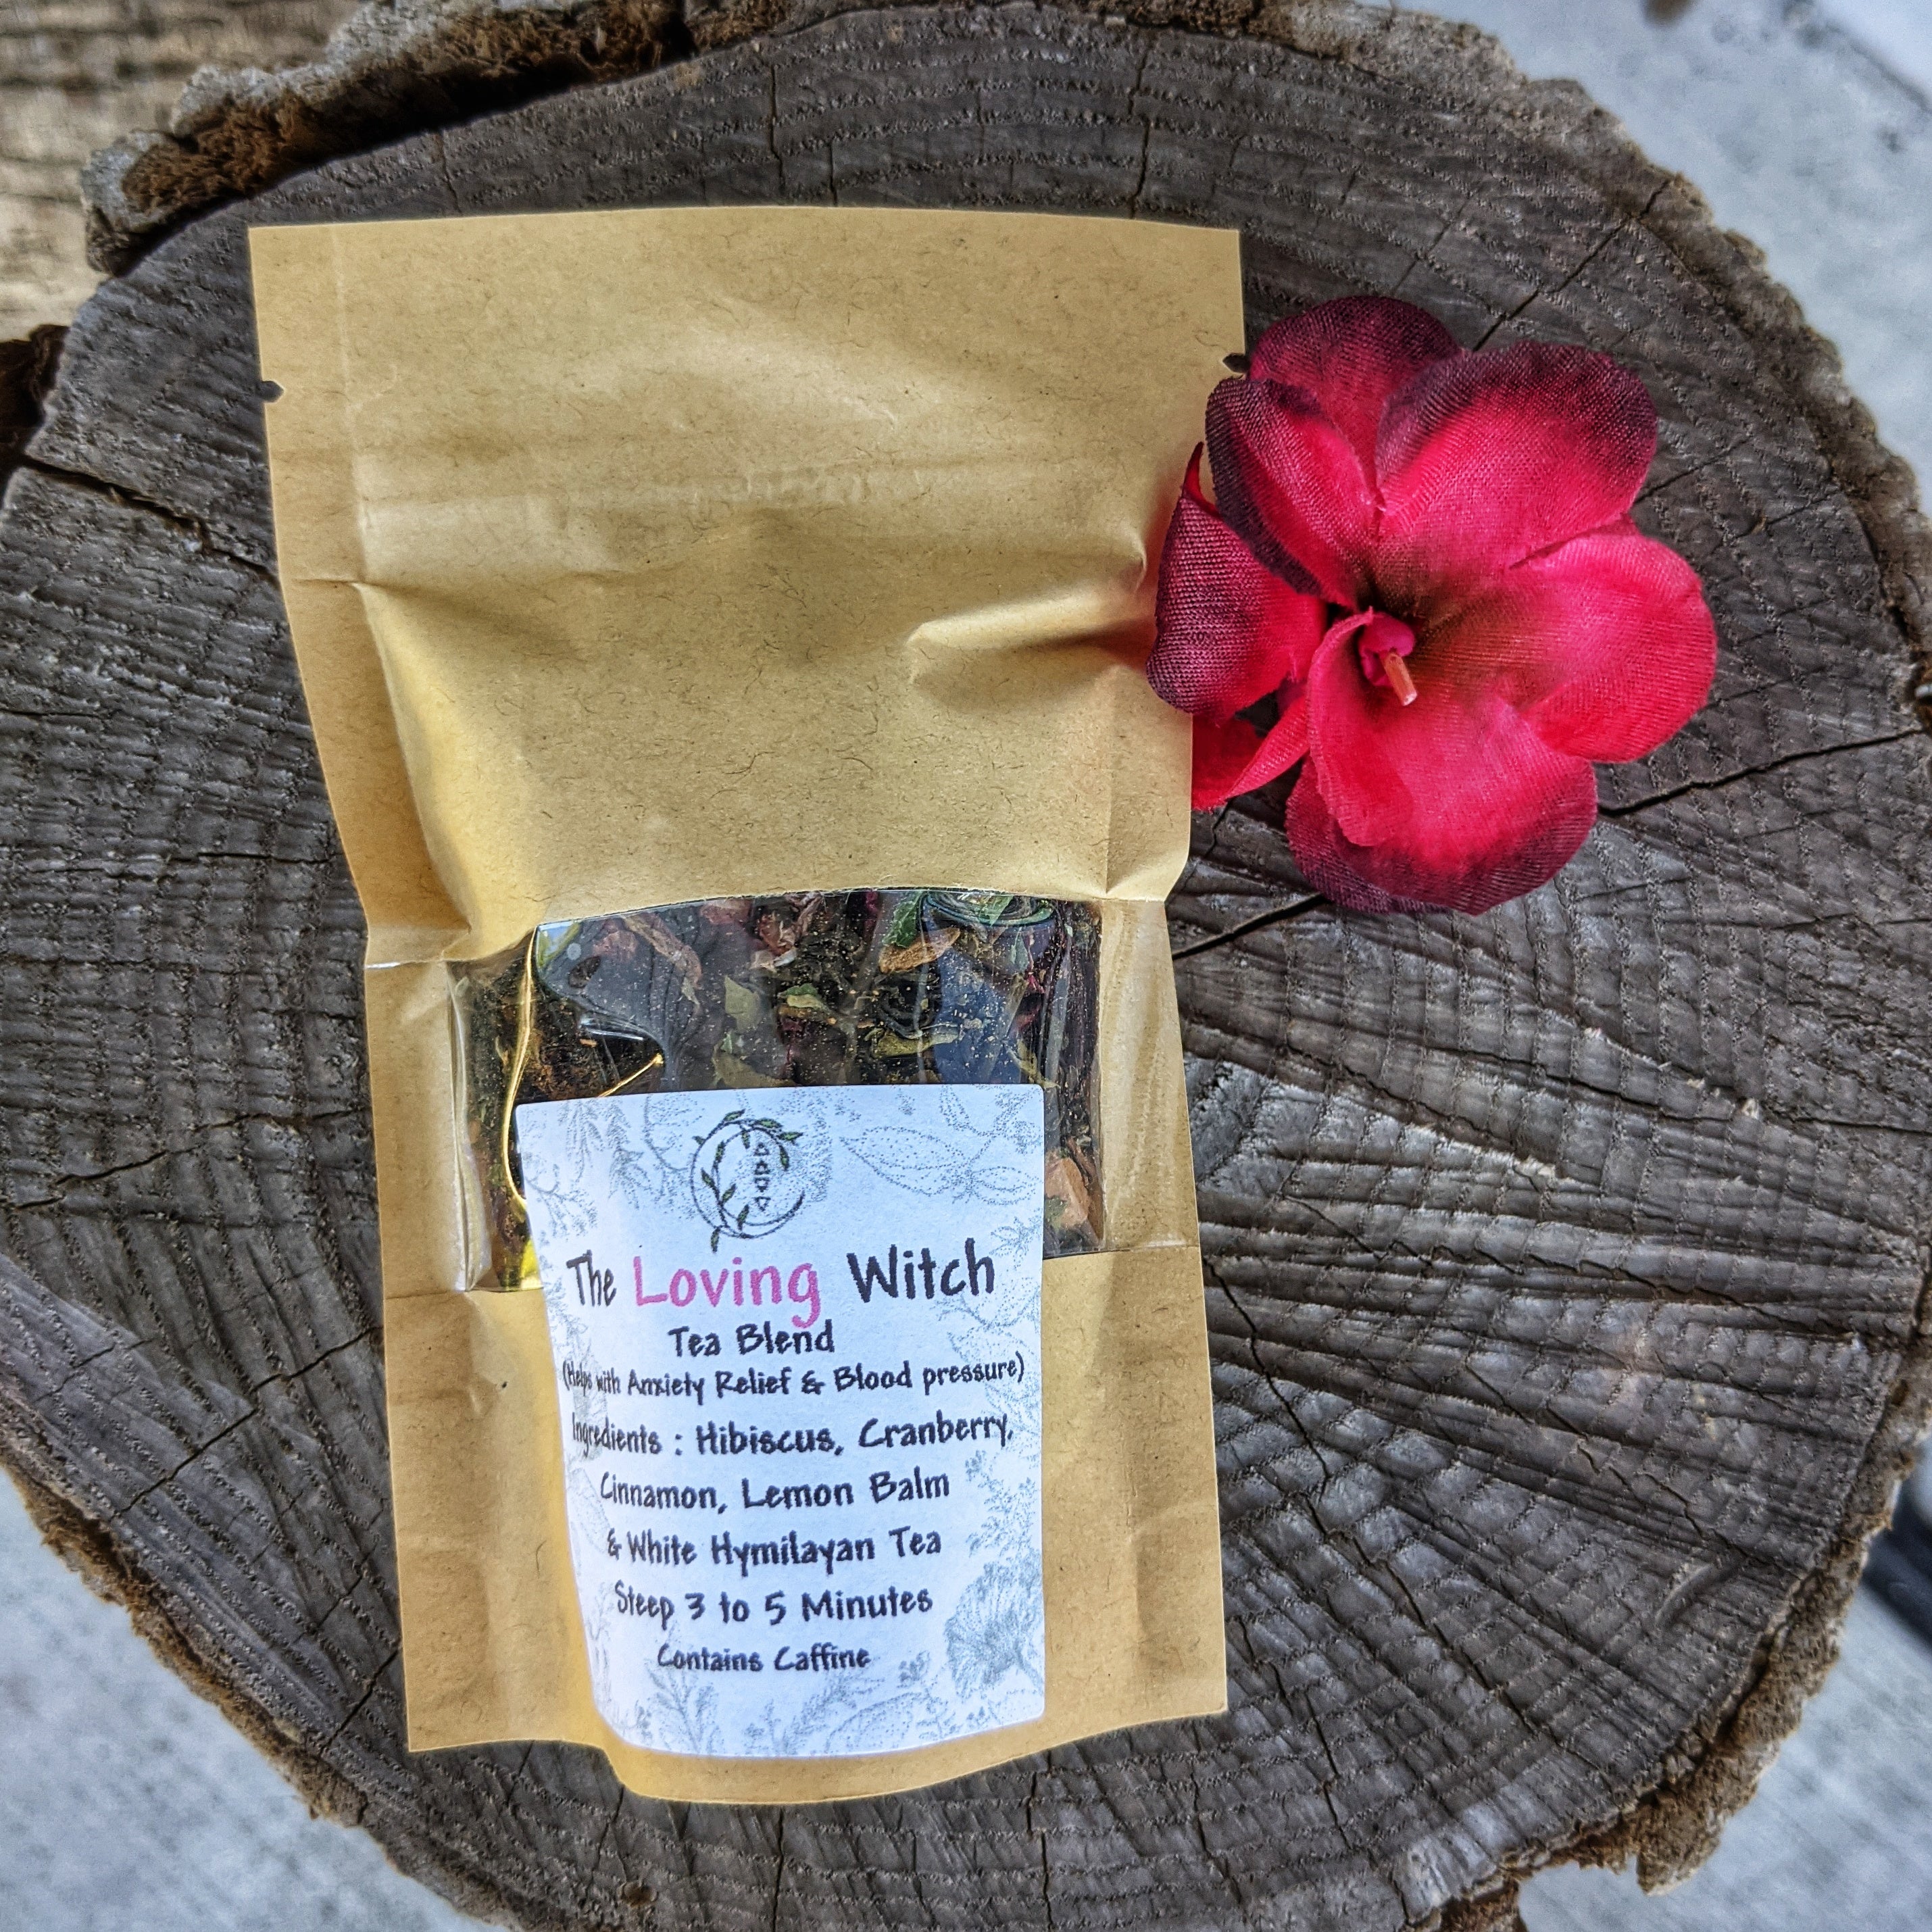 The Loving Witch (tea blend)